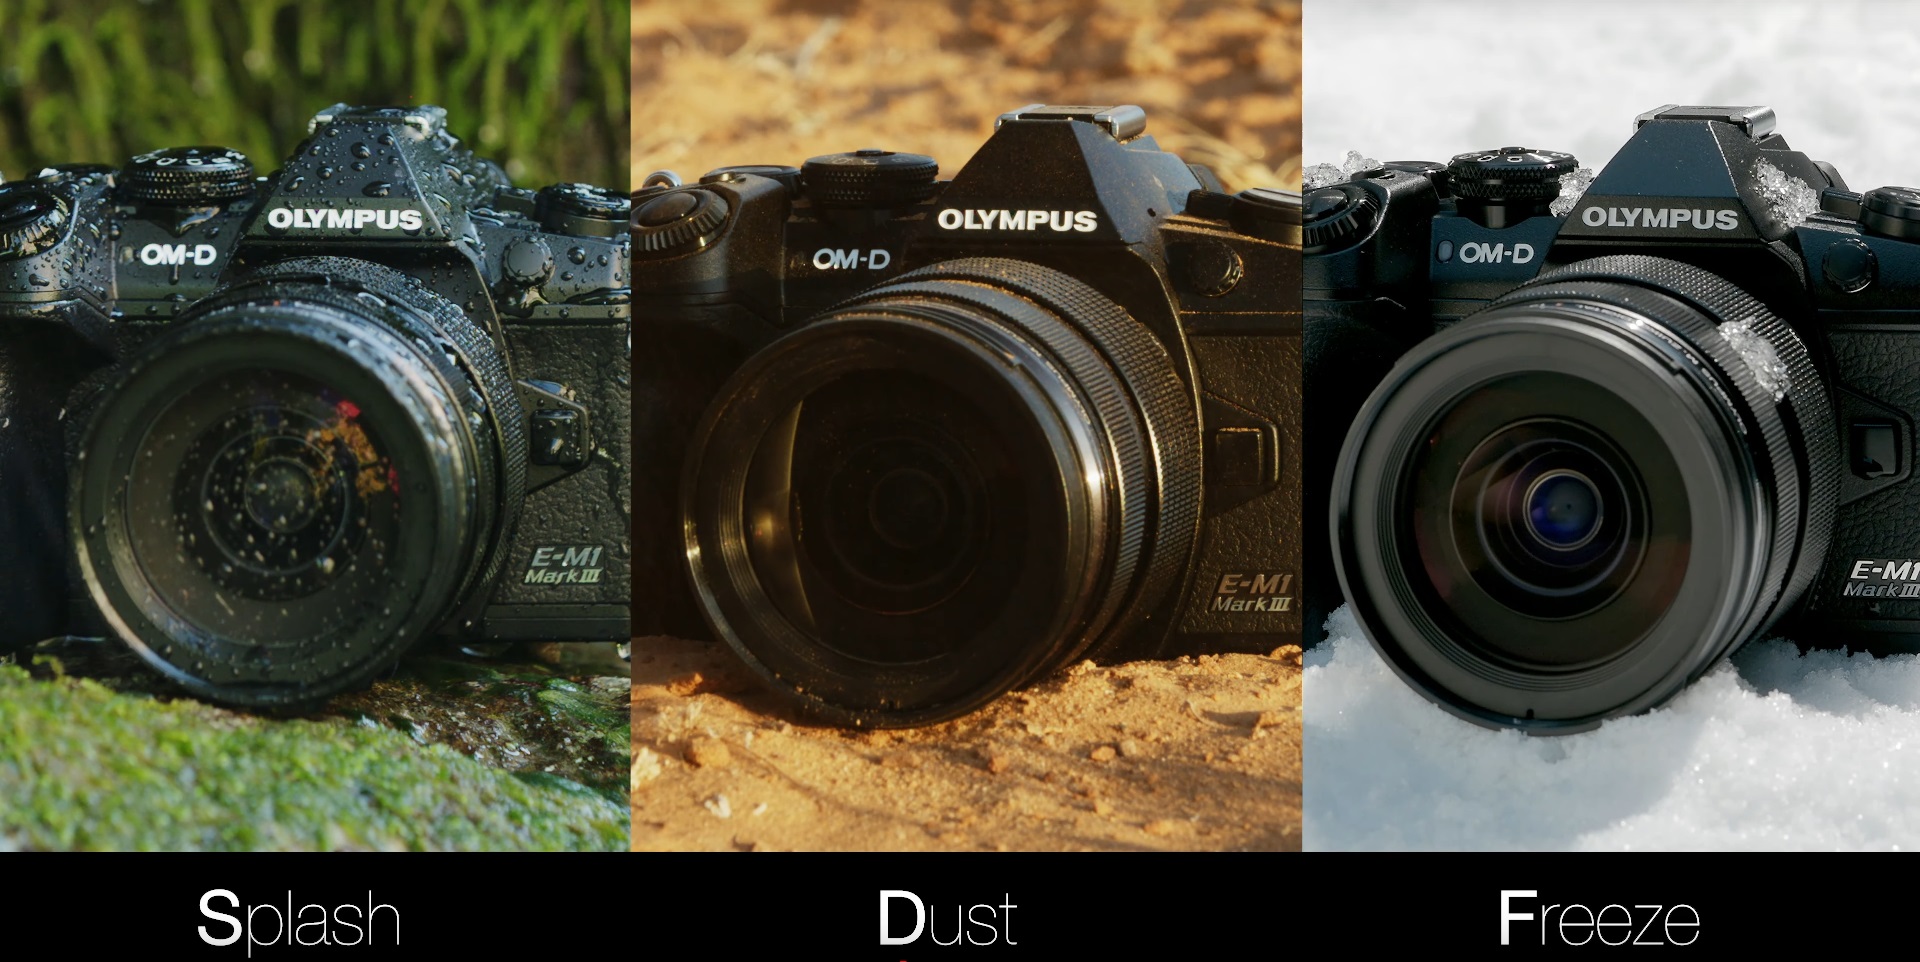 Olympus Om D E M1 Mark Iii Announced Impressive Stabilization And Photo Features Cined